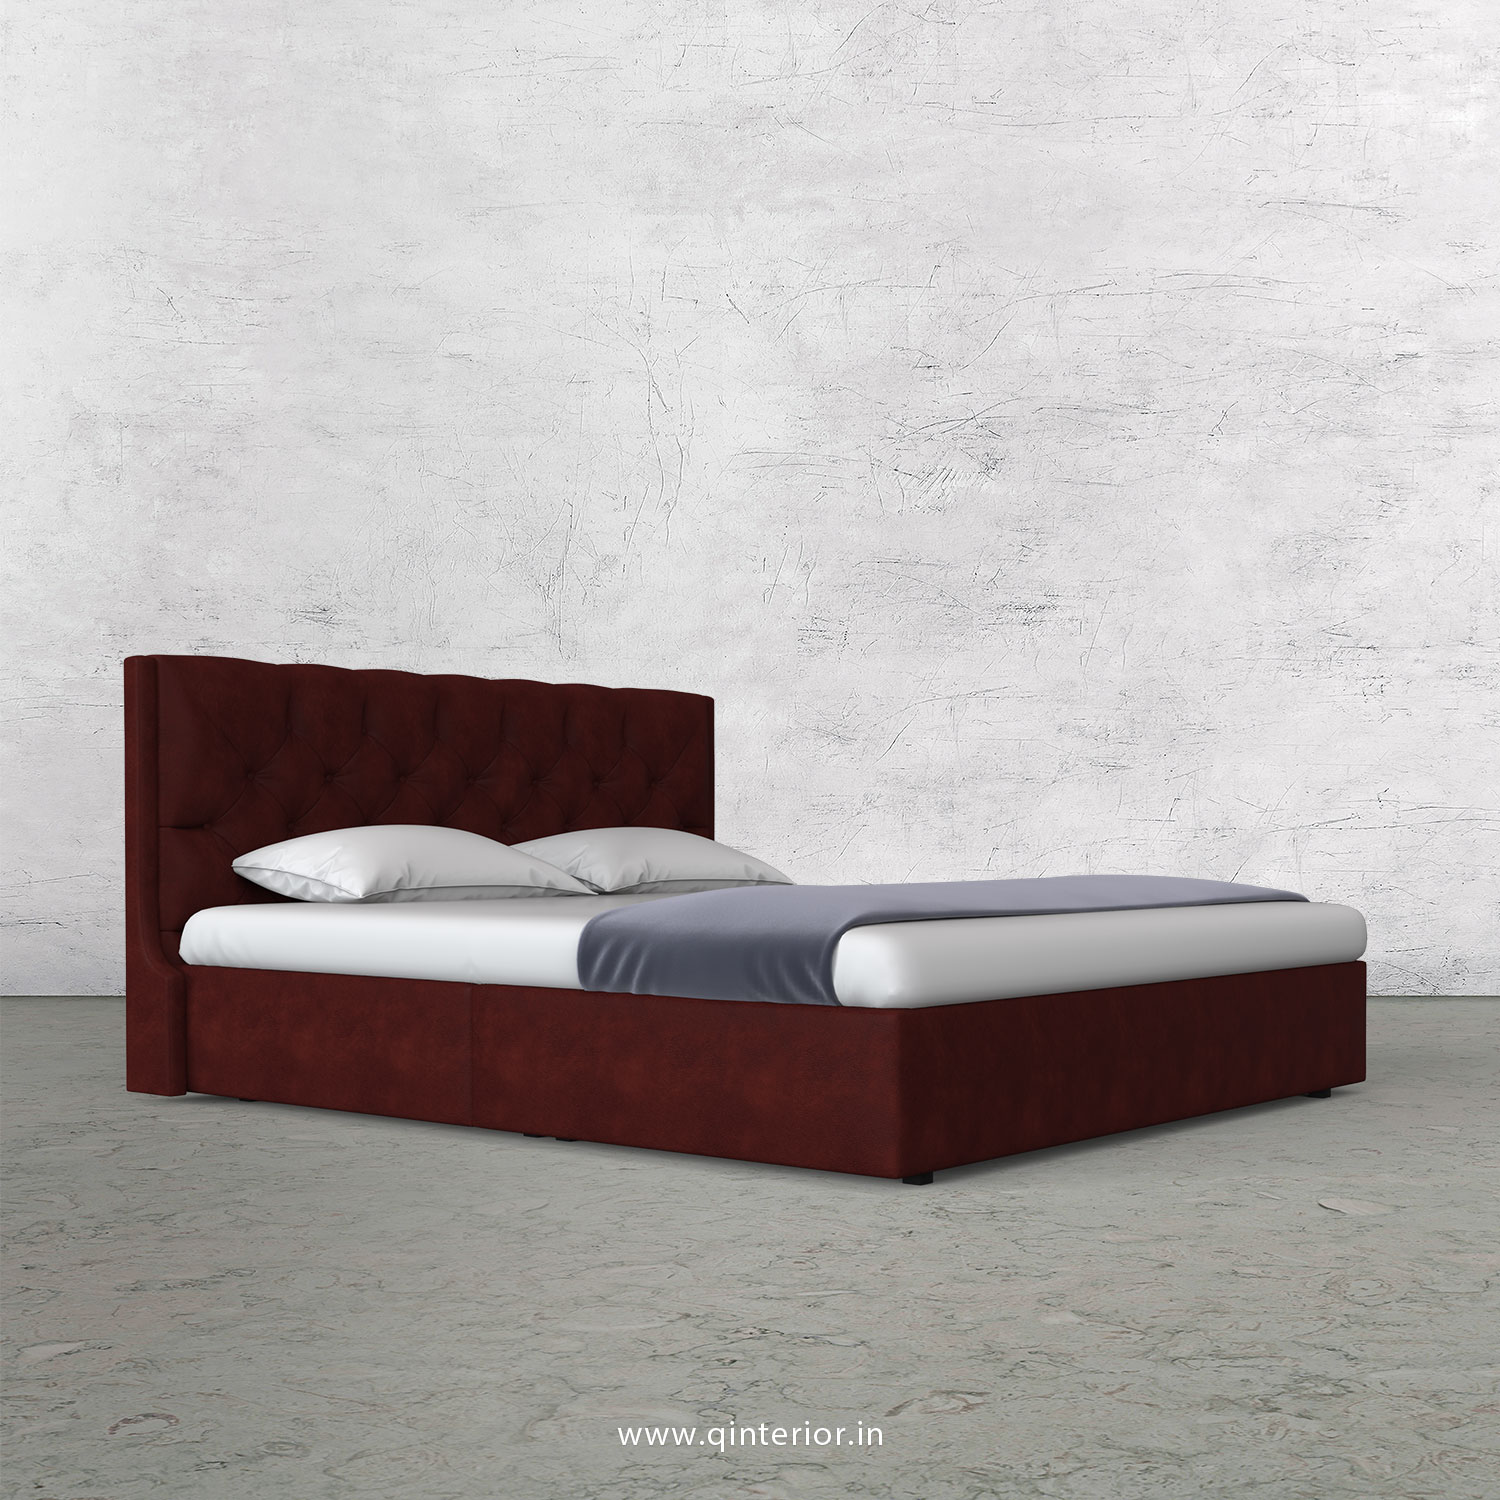 Scorpius Queen Bed in Fab Leather Fabric - QBD009 FL17